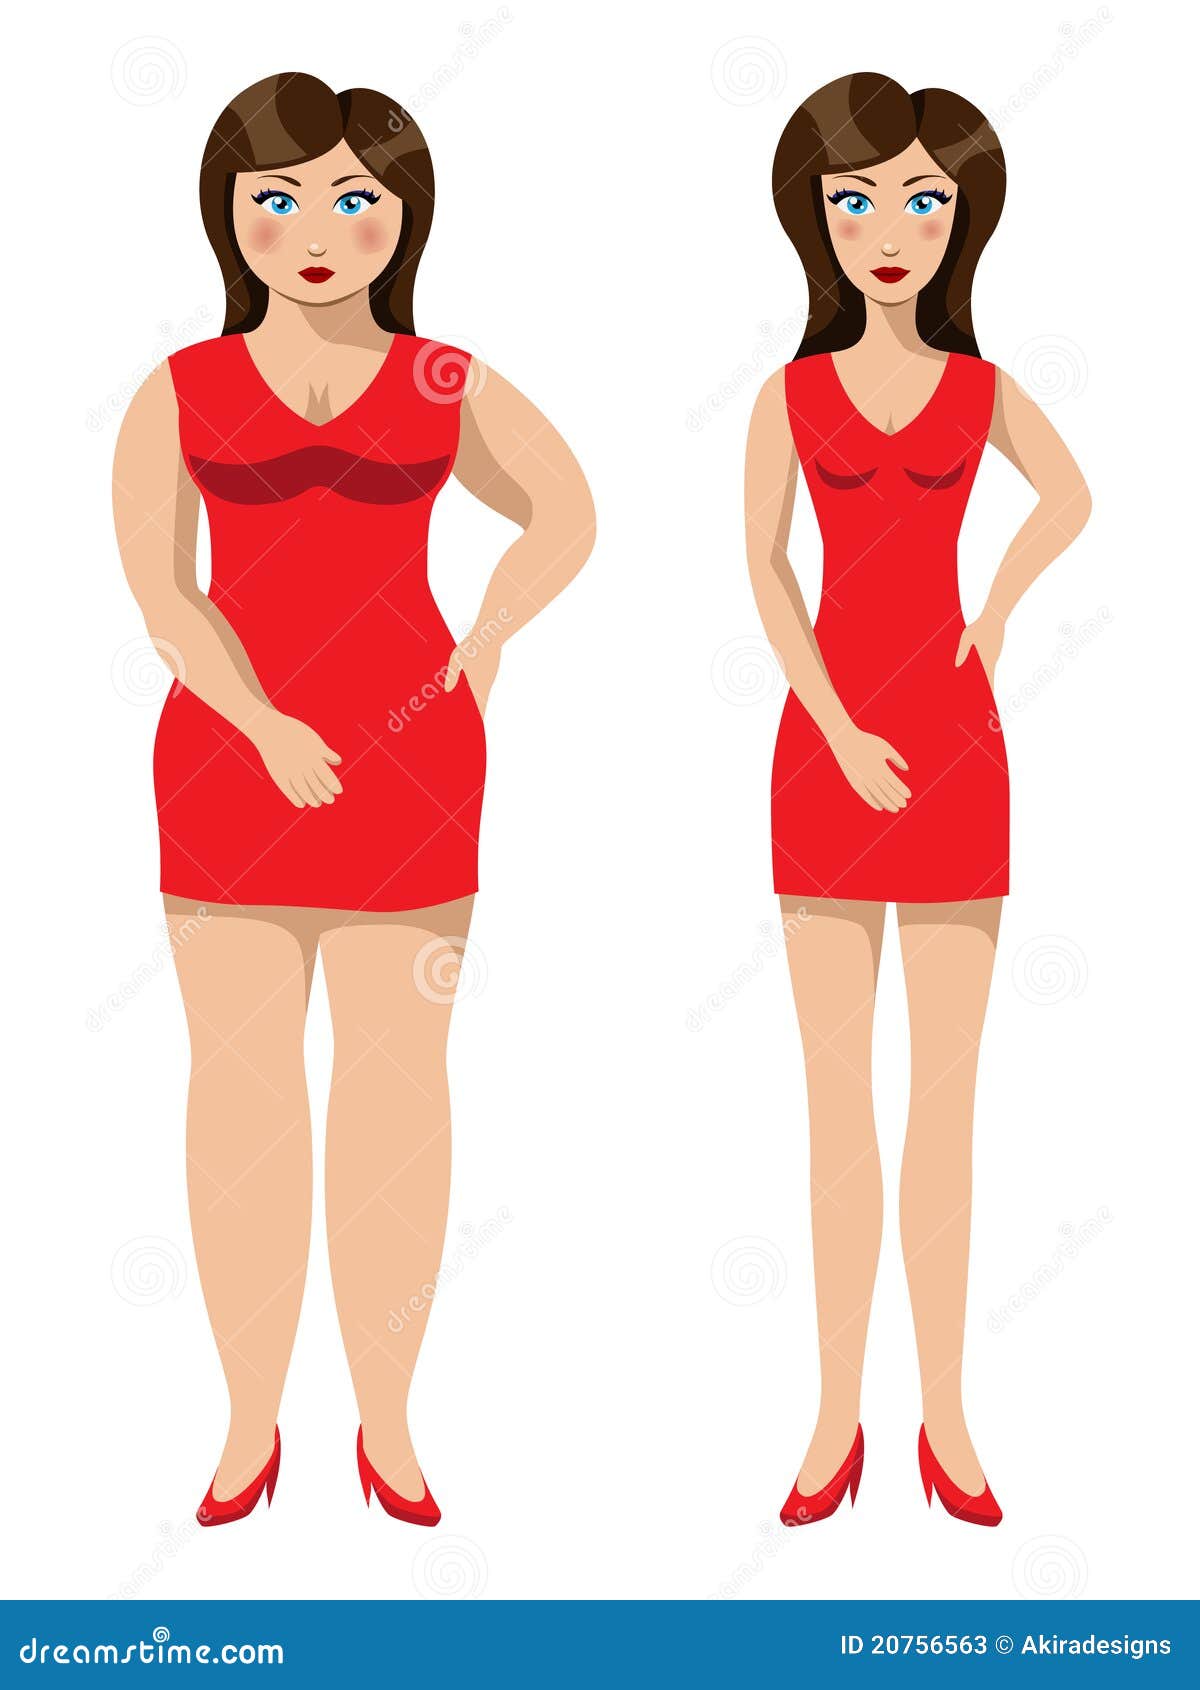 Beautiful Girl Before And After A Weight Loss Stock Vector Illustration Of Lady Form 20756563